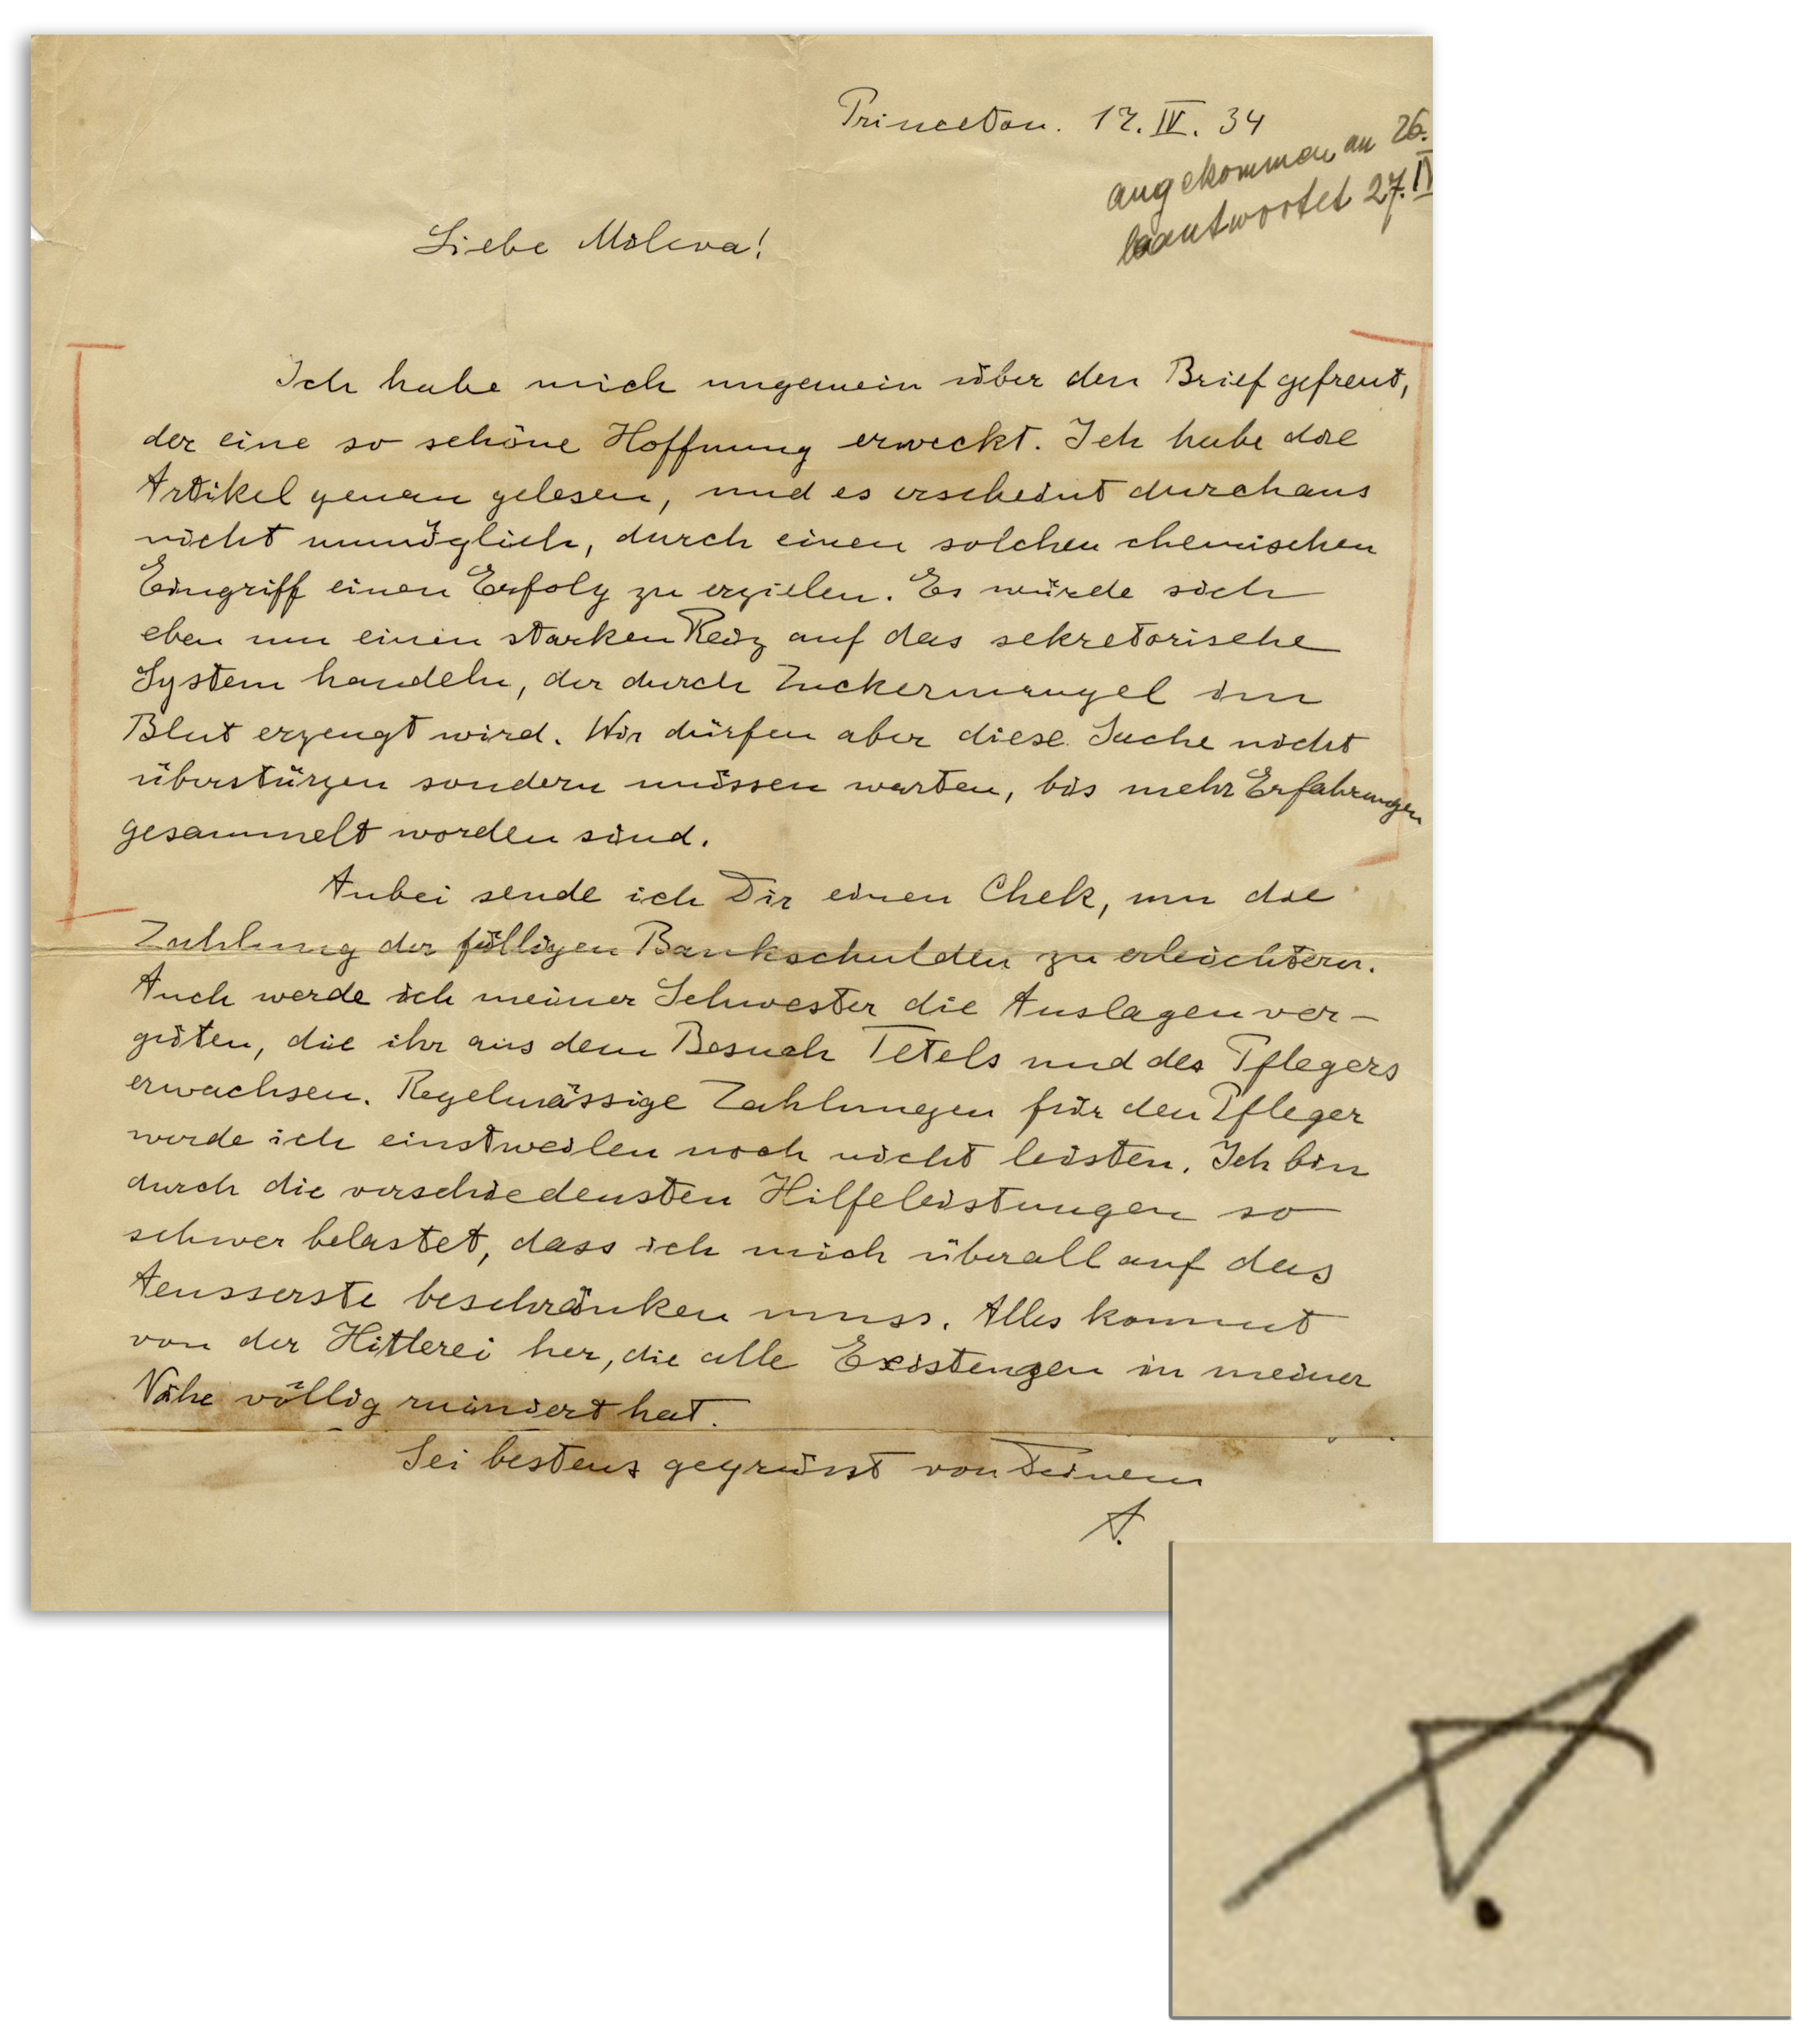 Einstein S Letter Denouncing Hitler Insanity Sells At Auction For 134 000